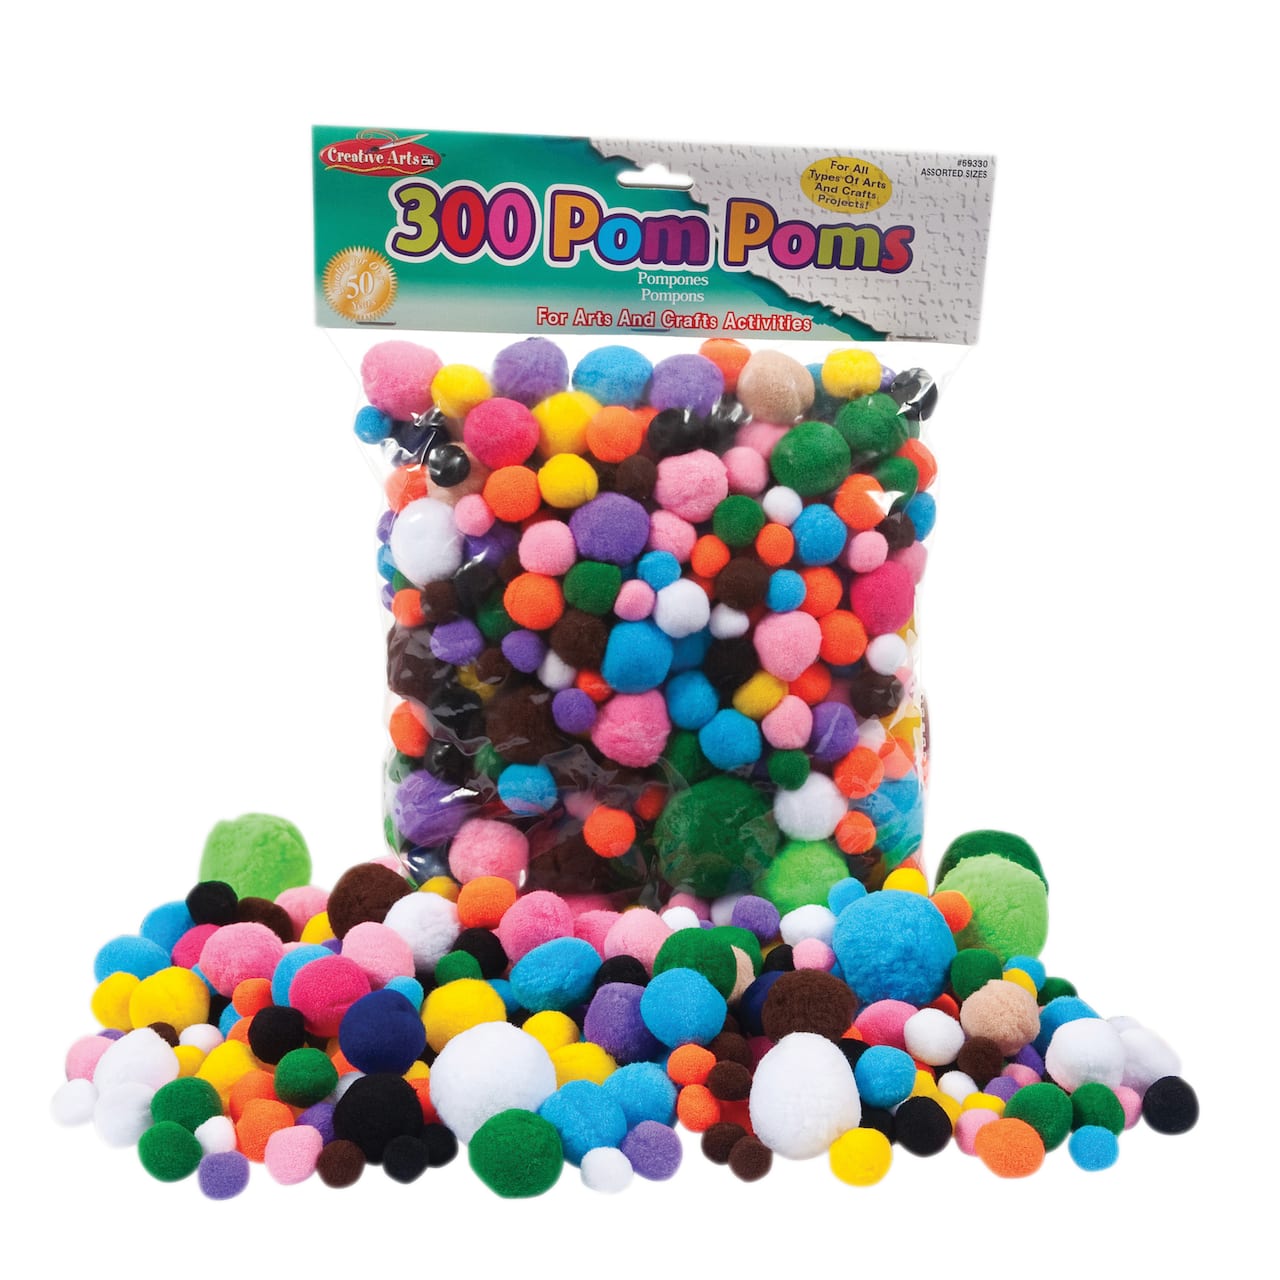 3 Packs: 4 Packs 300 ct. (3,600 total) Creative Arts™ Mixed Pom Poms